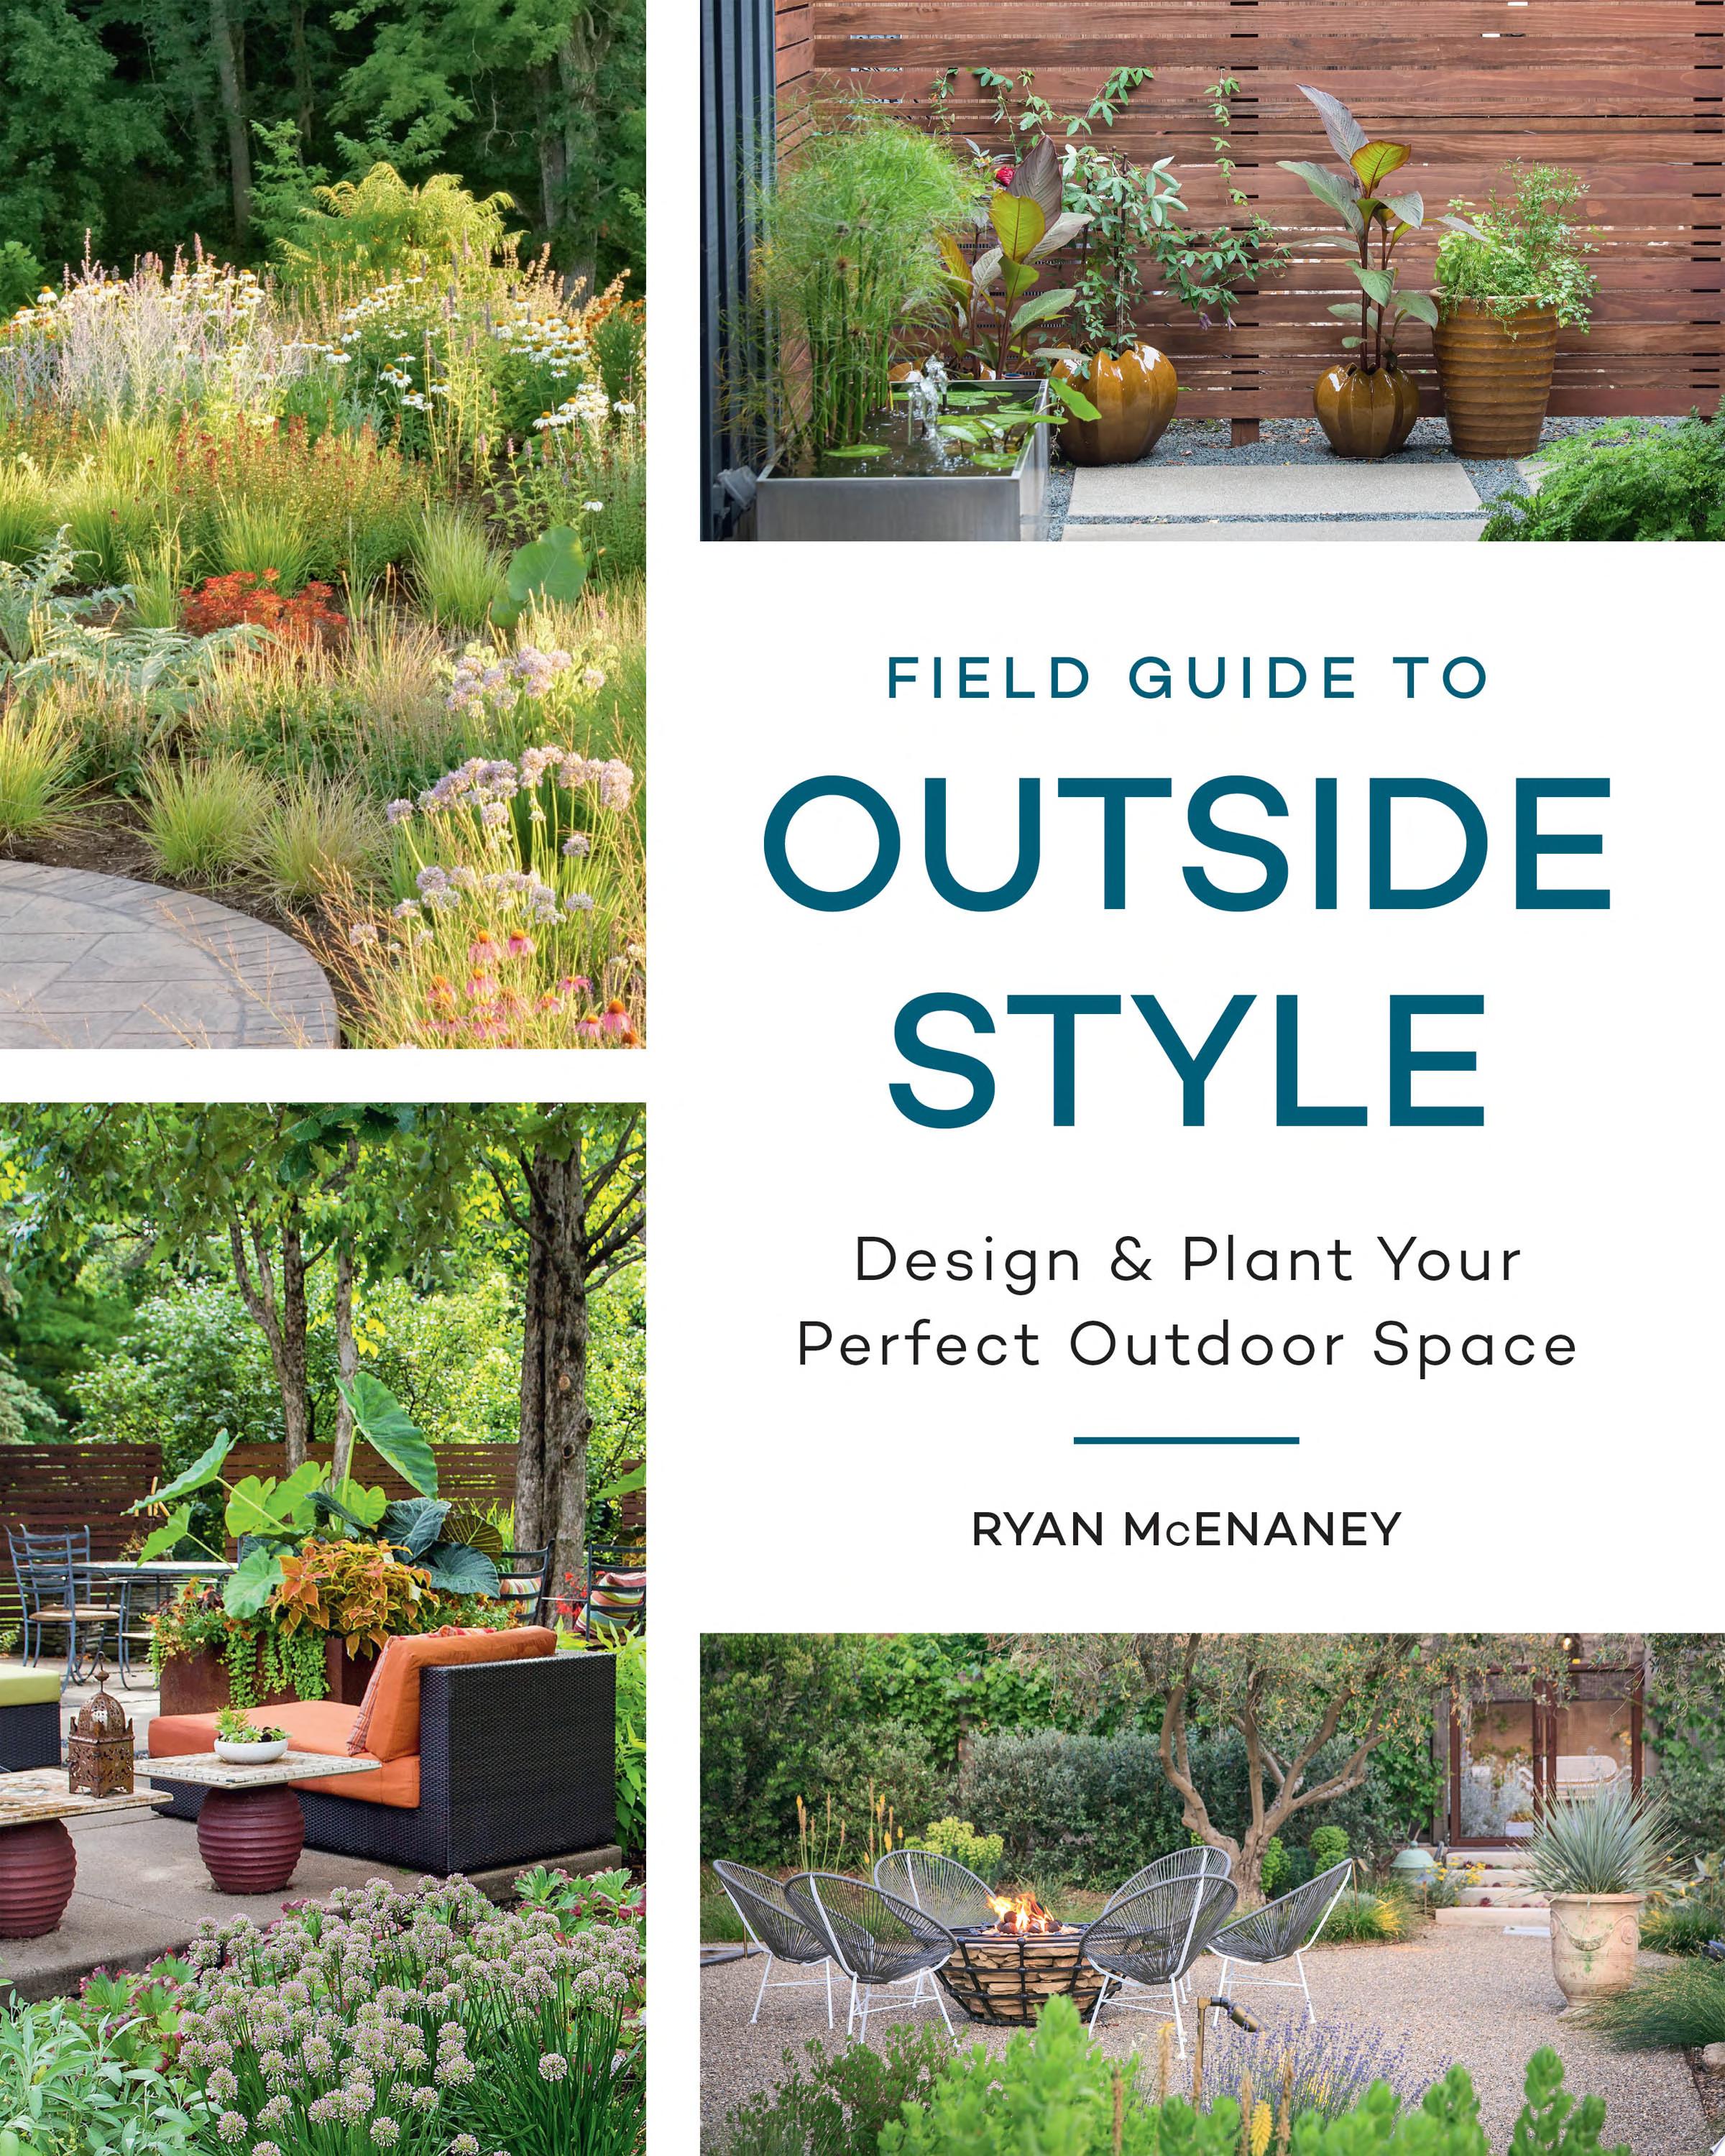 Image for "Field Guide to Outside Style"